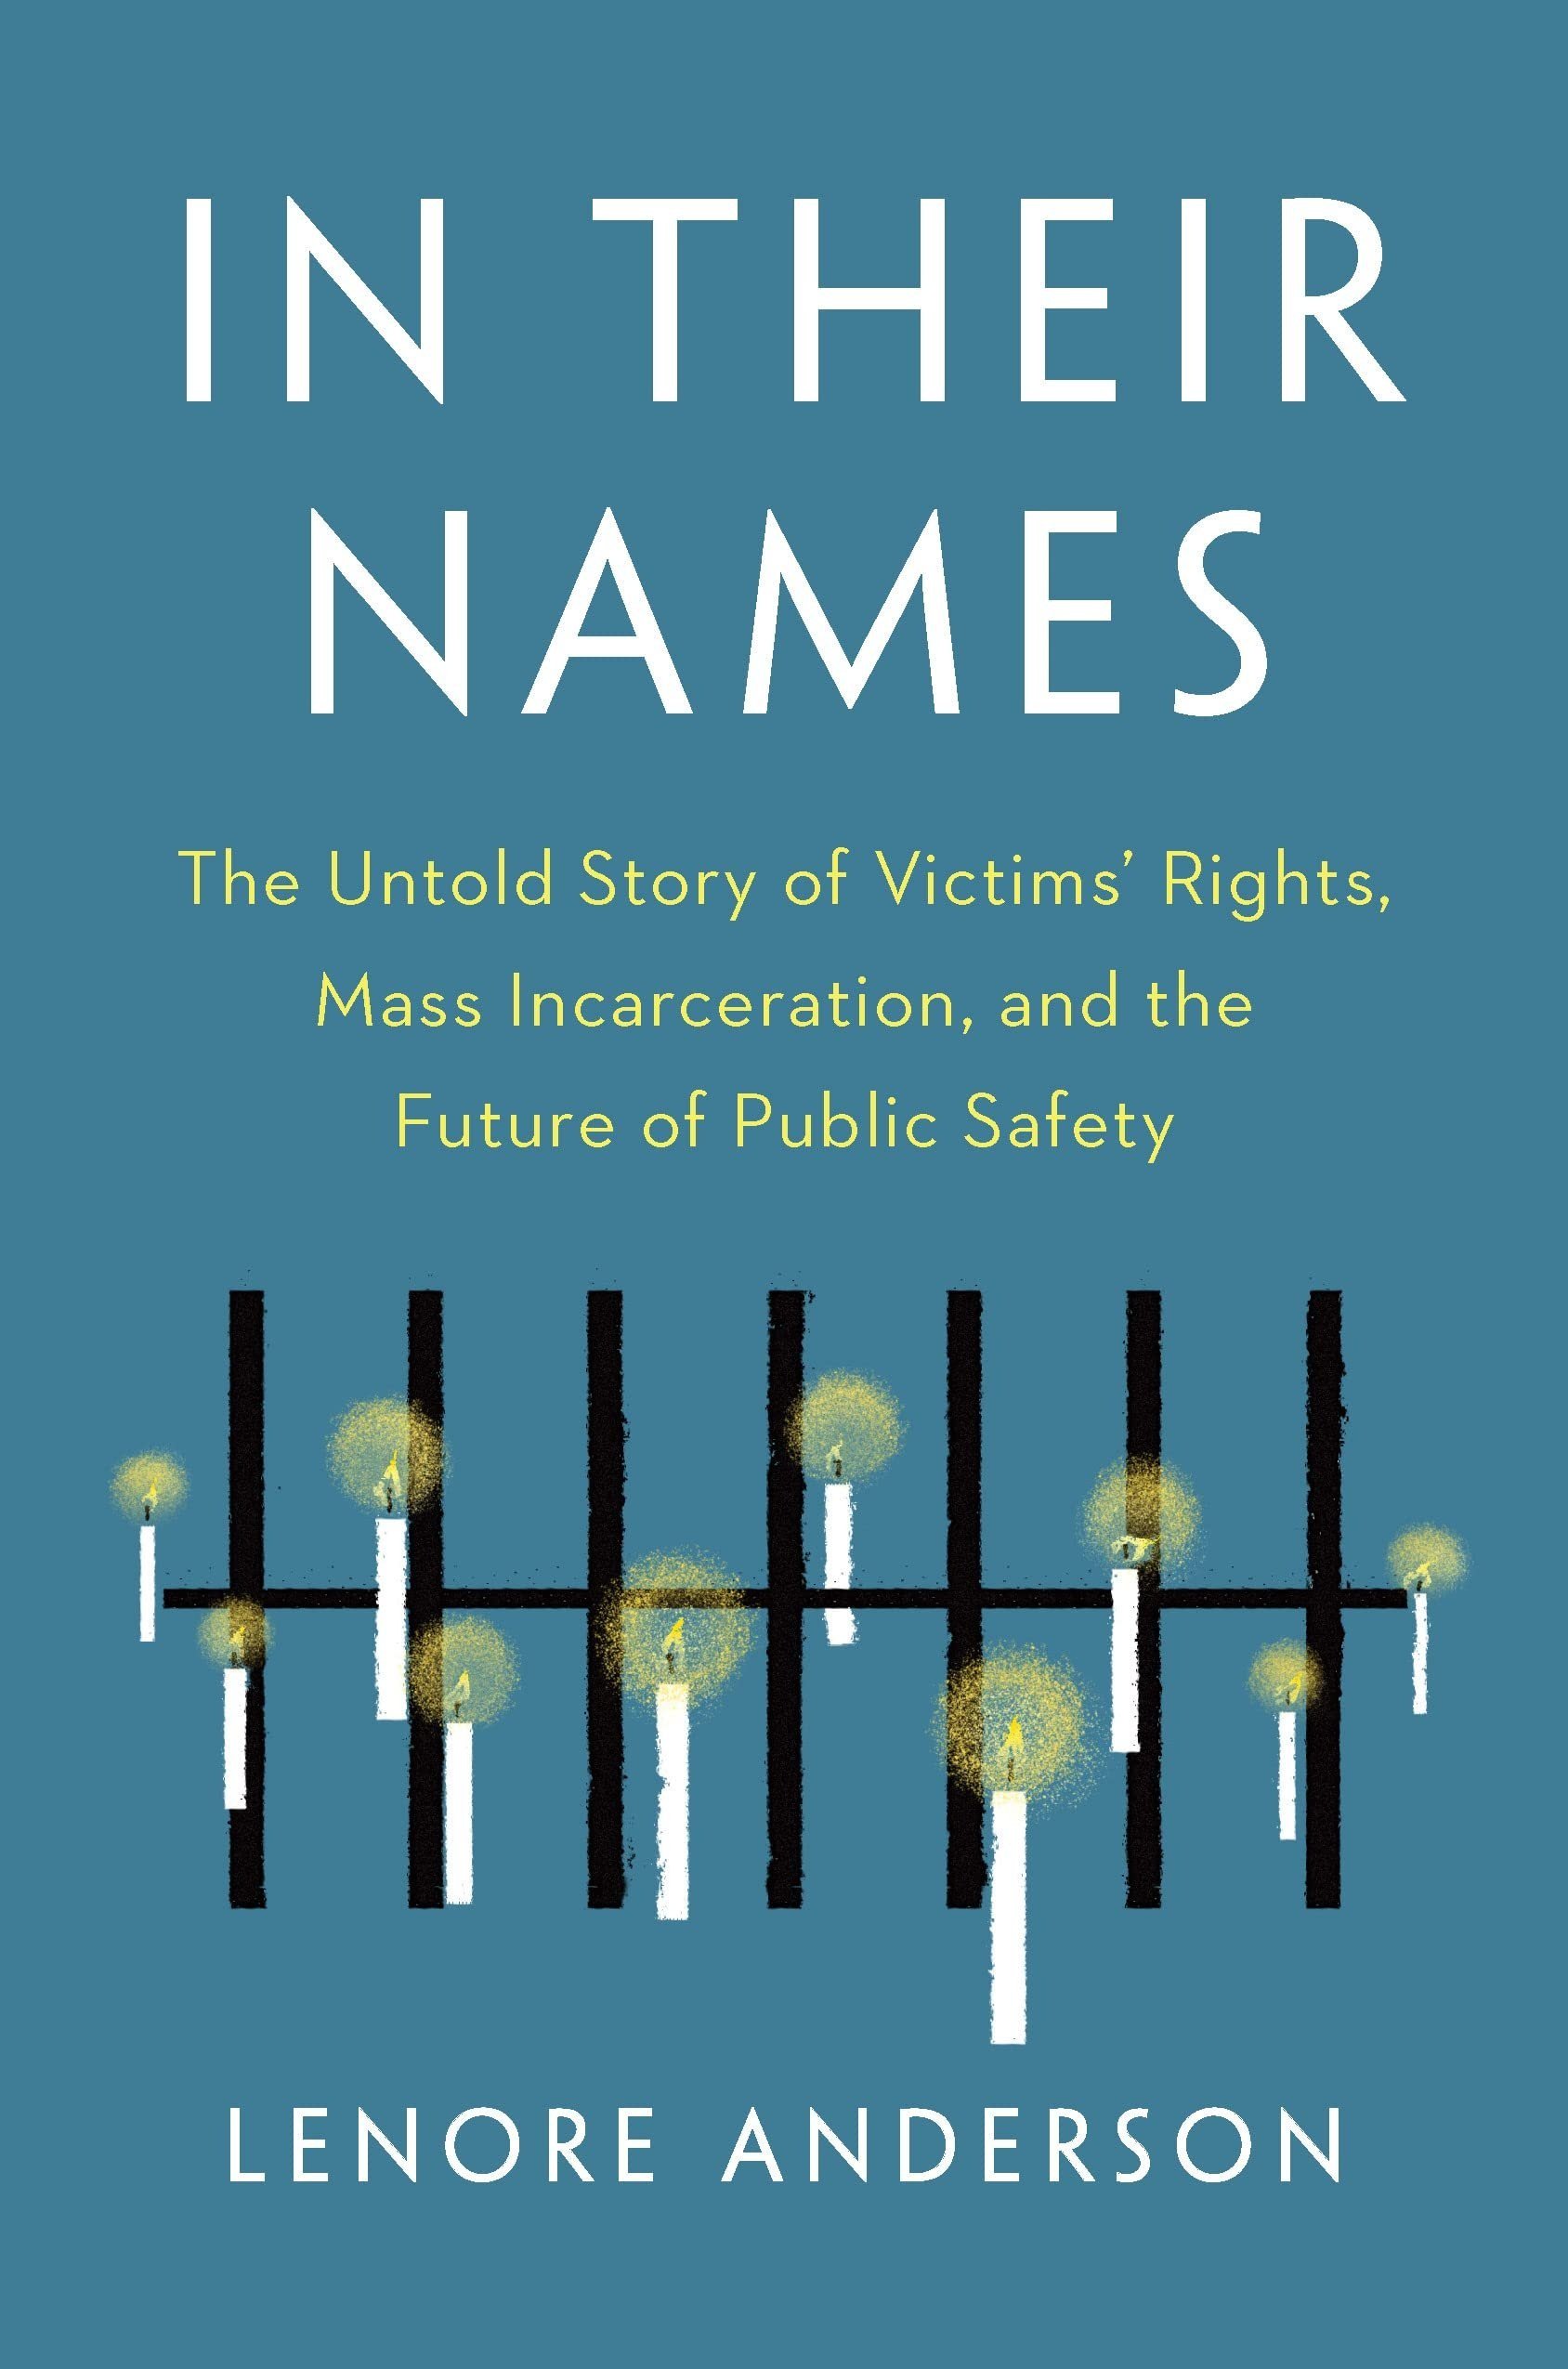 In Their Names: The Untold Story of Victims’ Rights, Mass Incarceration, and the Future of Public Safety by Lenore Anderson